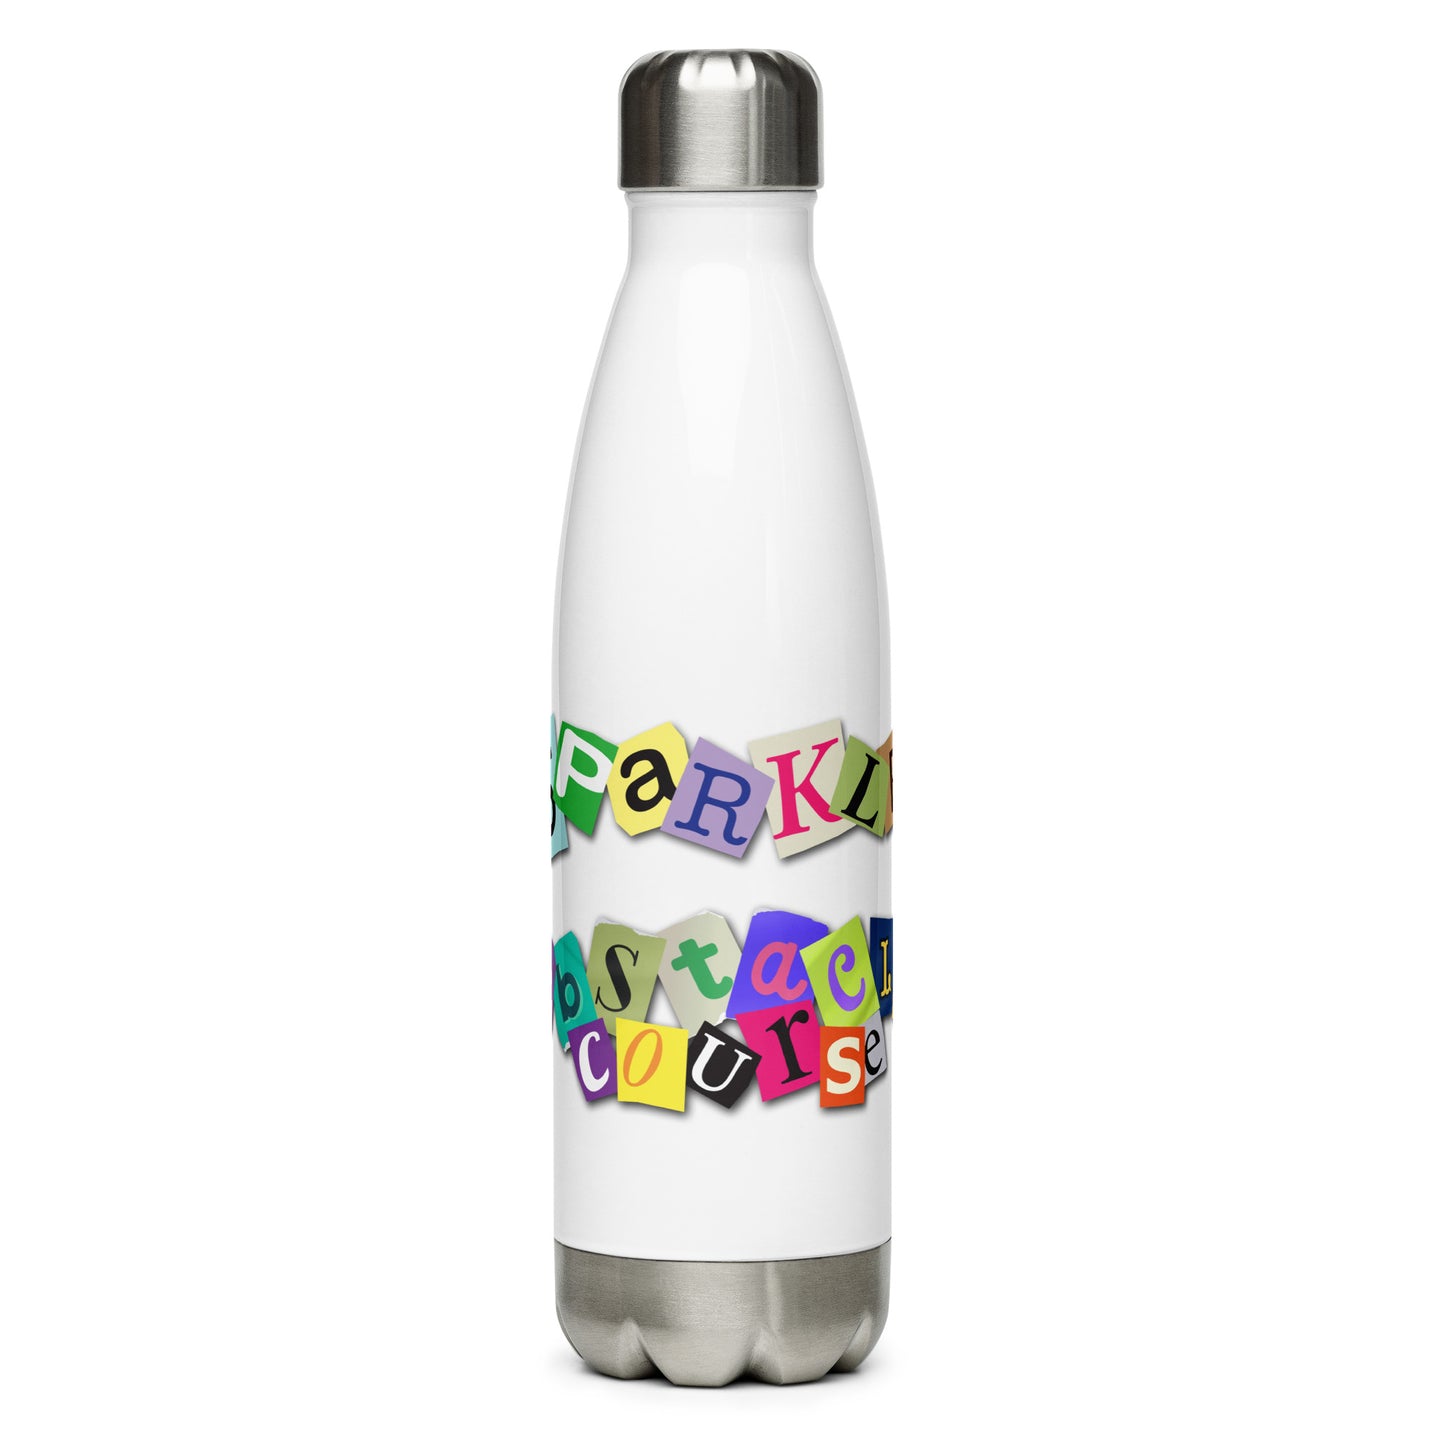 Sparkle: 'Obstacle Course' Stainless Steel Water Bottle